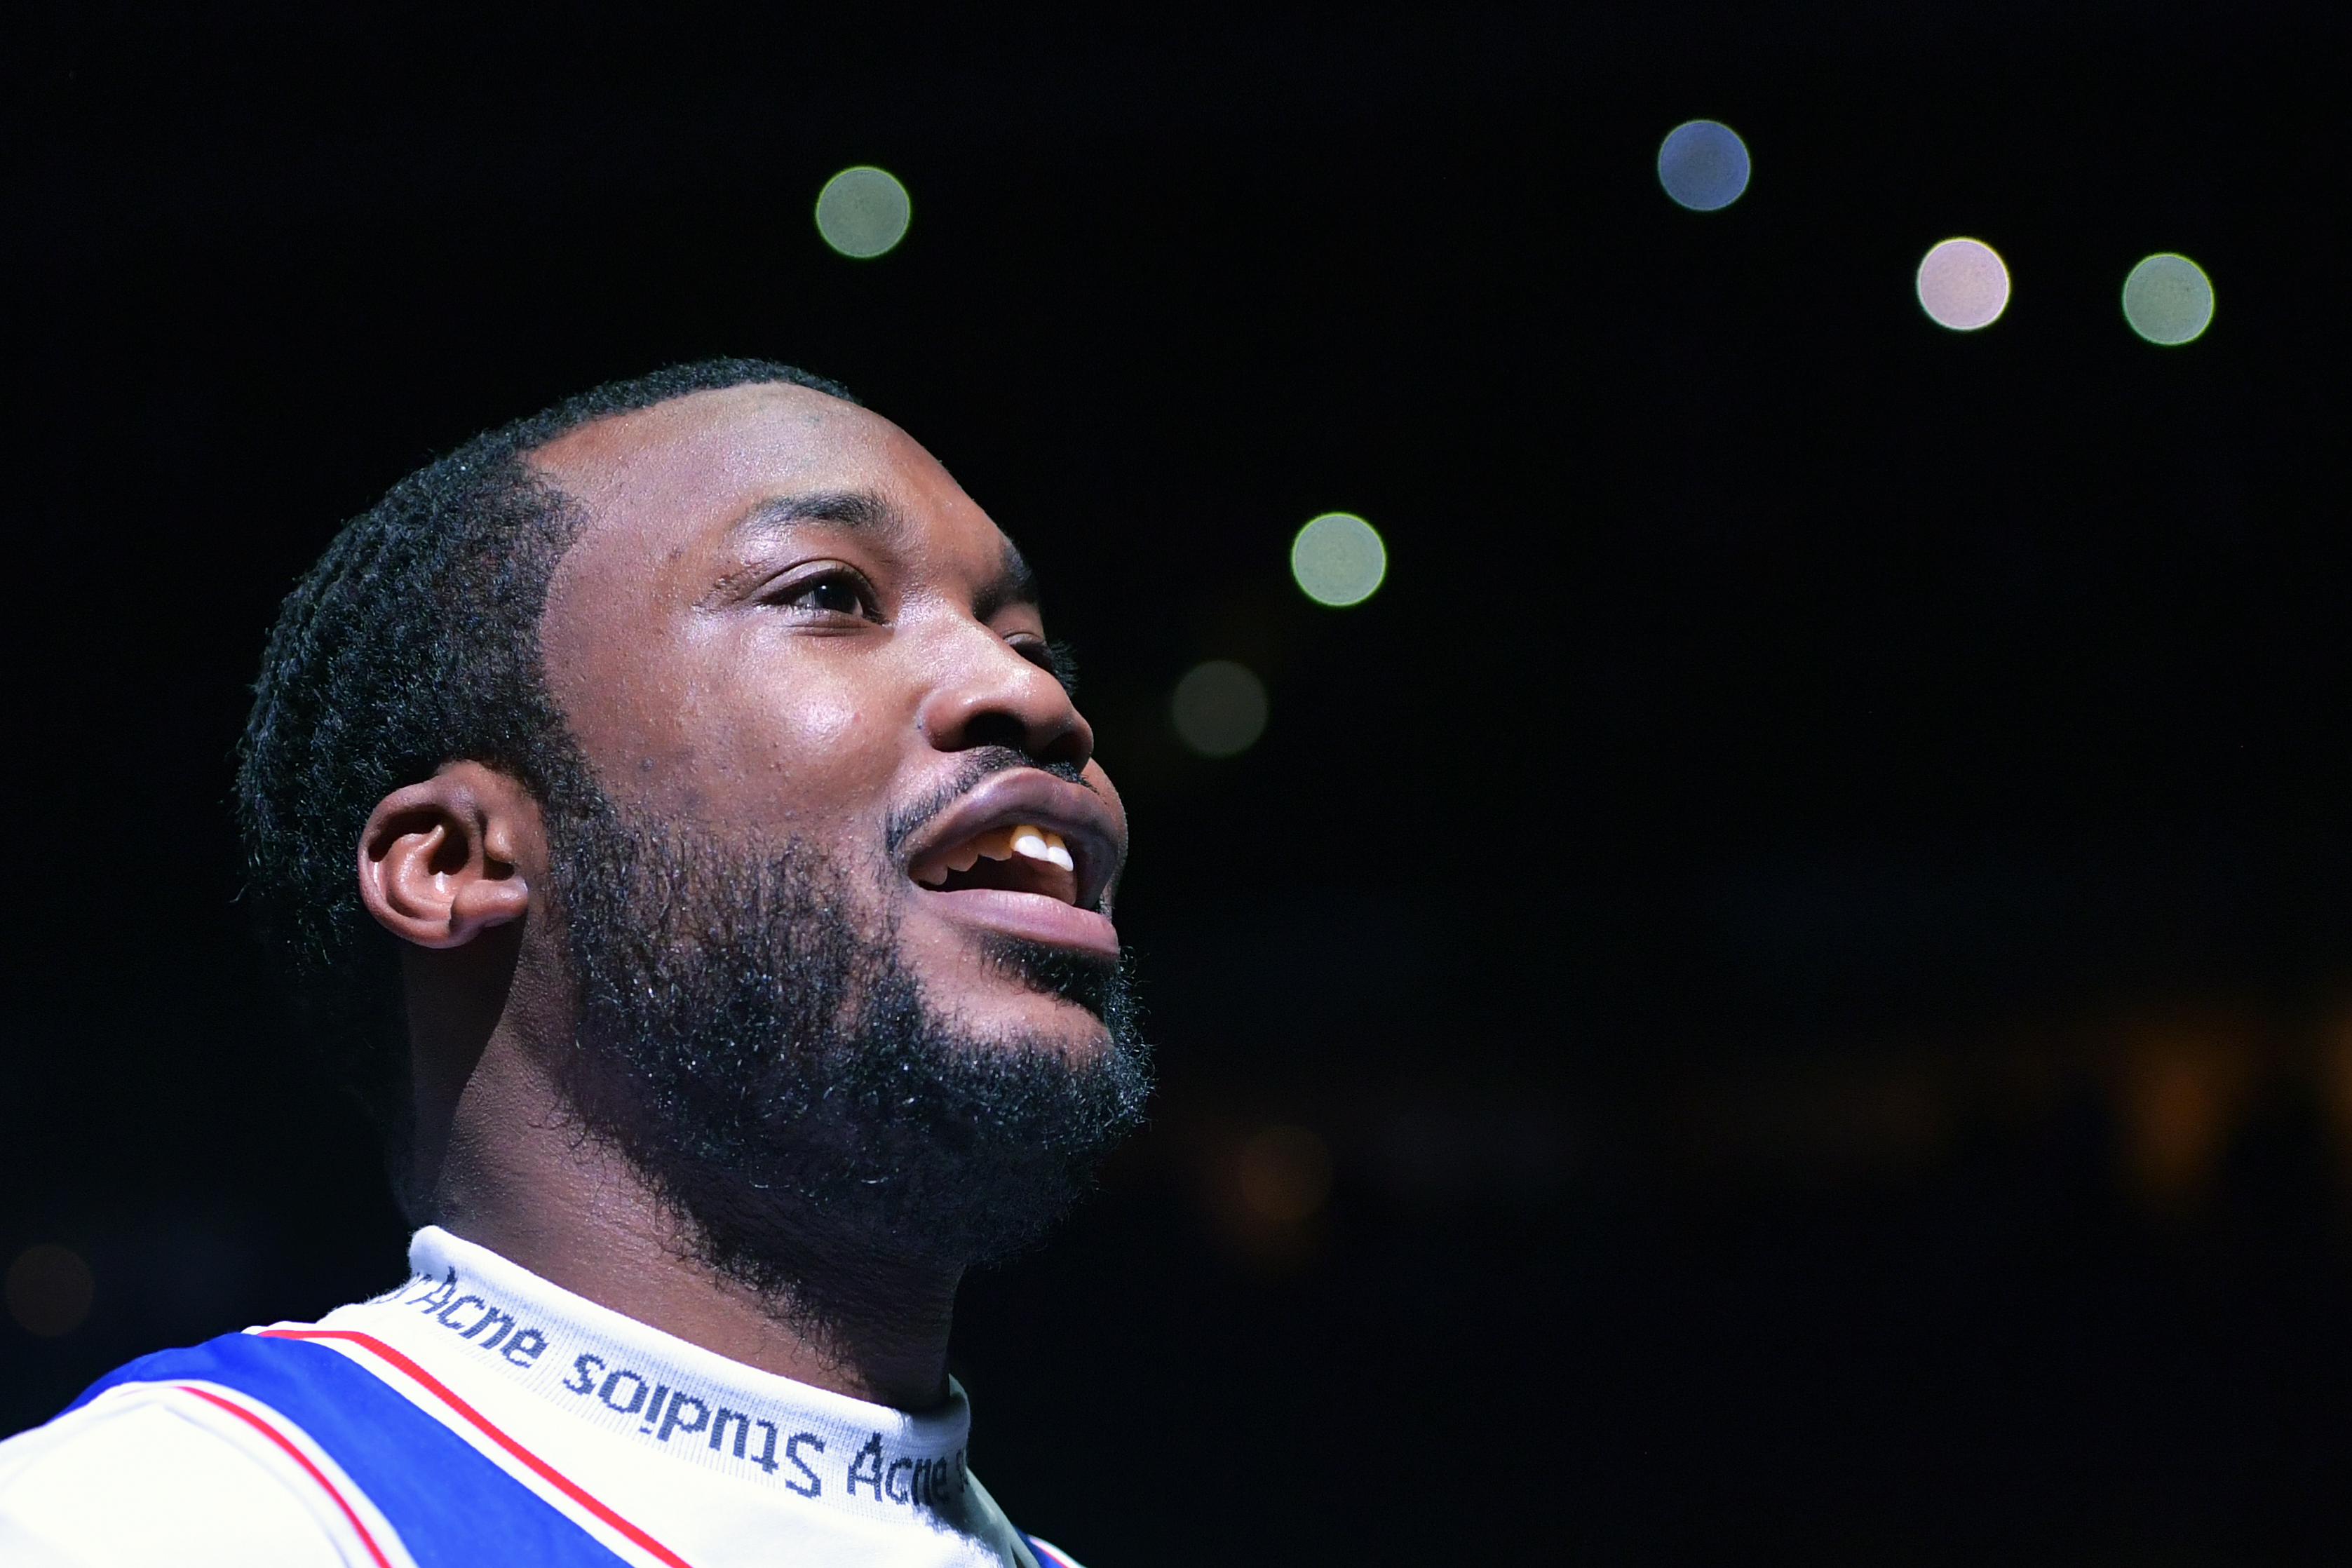 Meek Mill Pledges to Fight Criminal Injustice, Overturn Conviction After Release